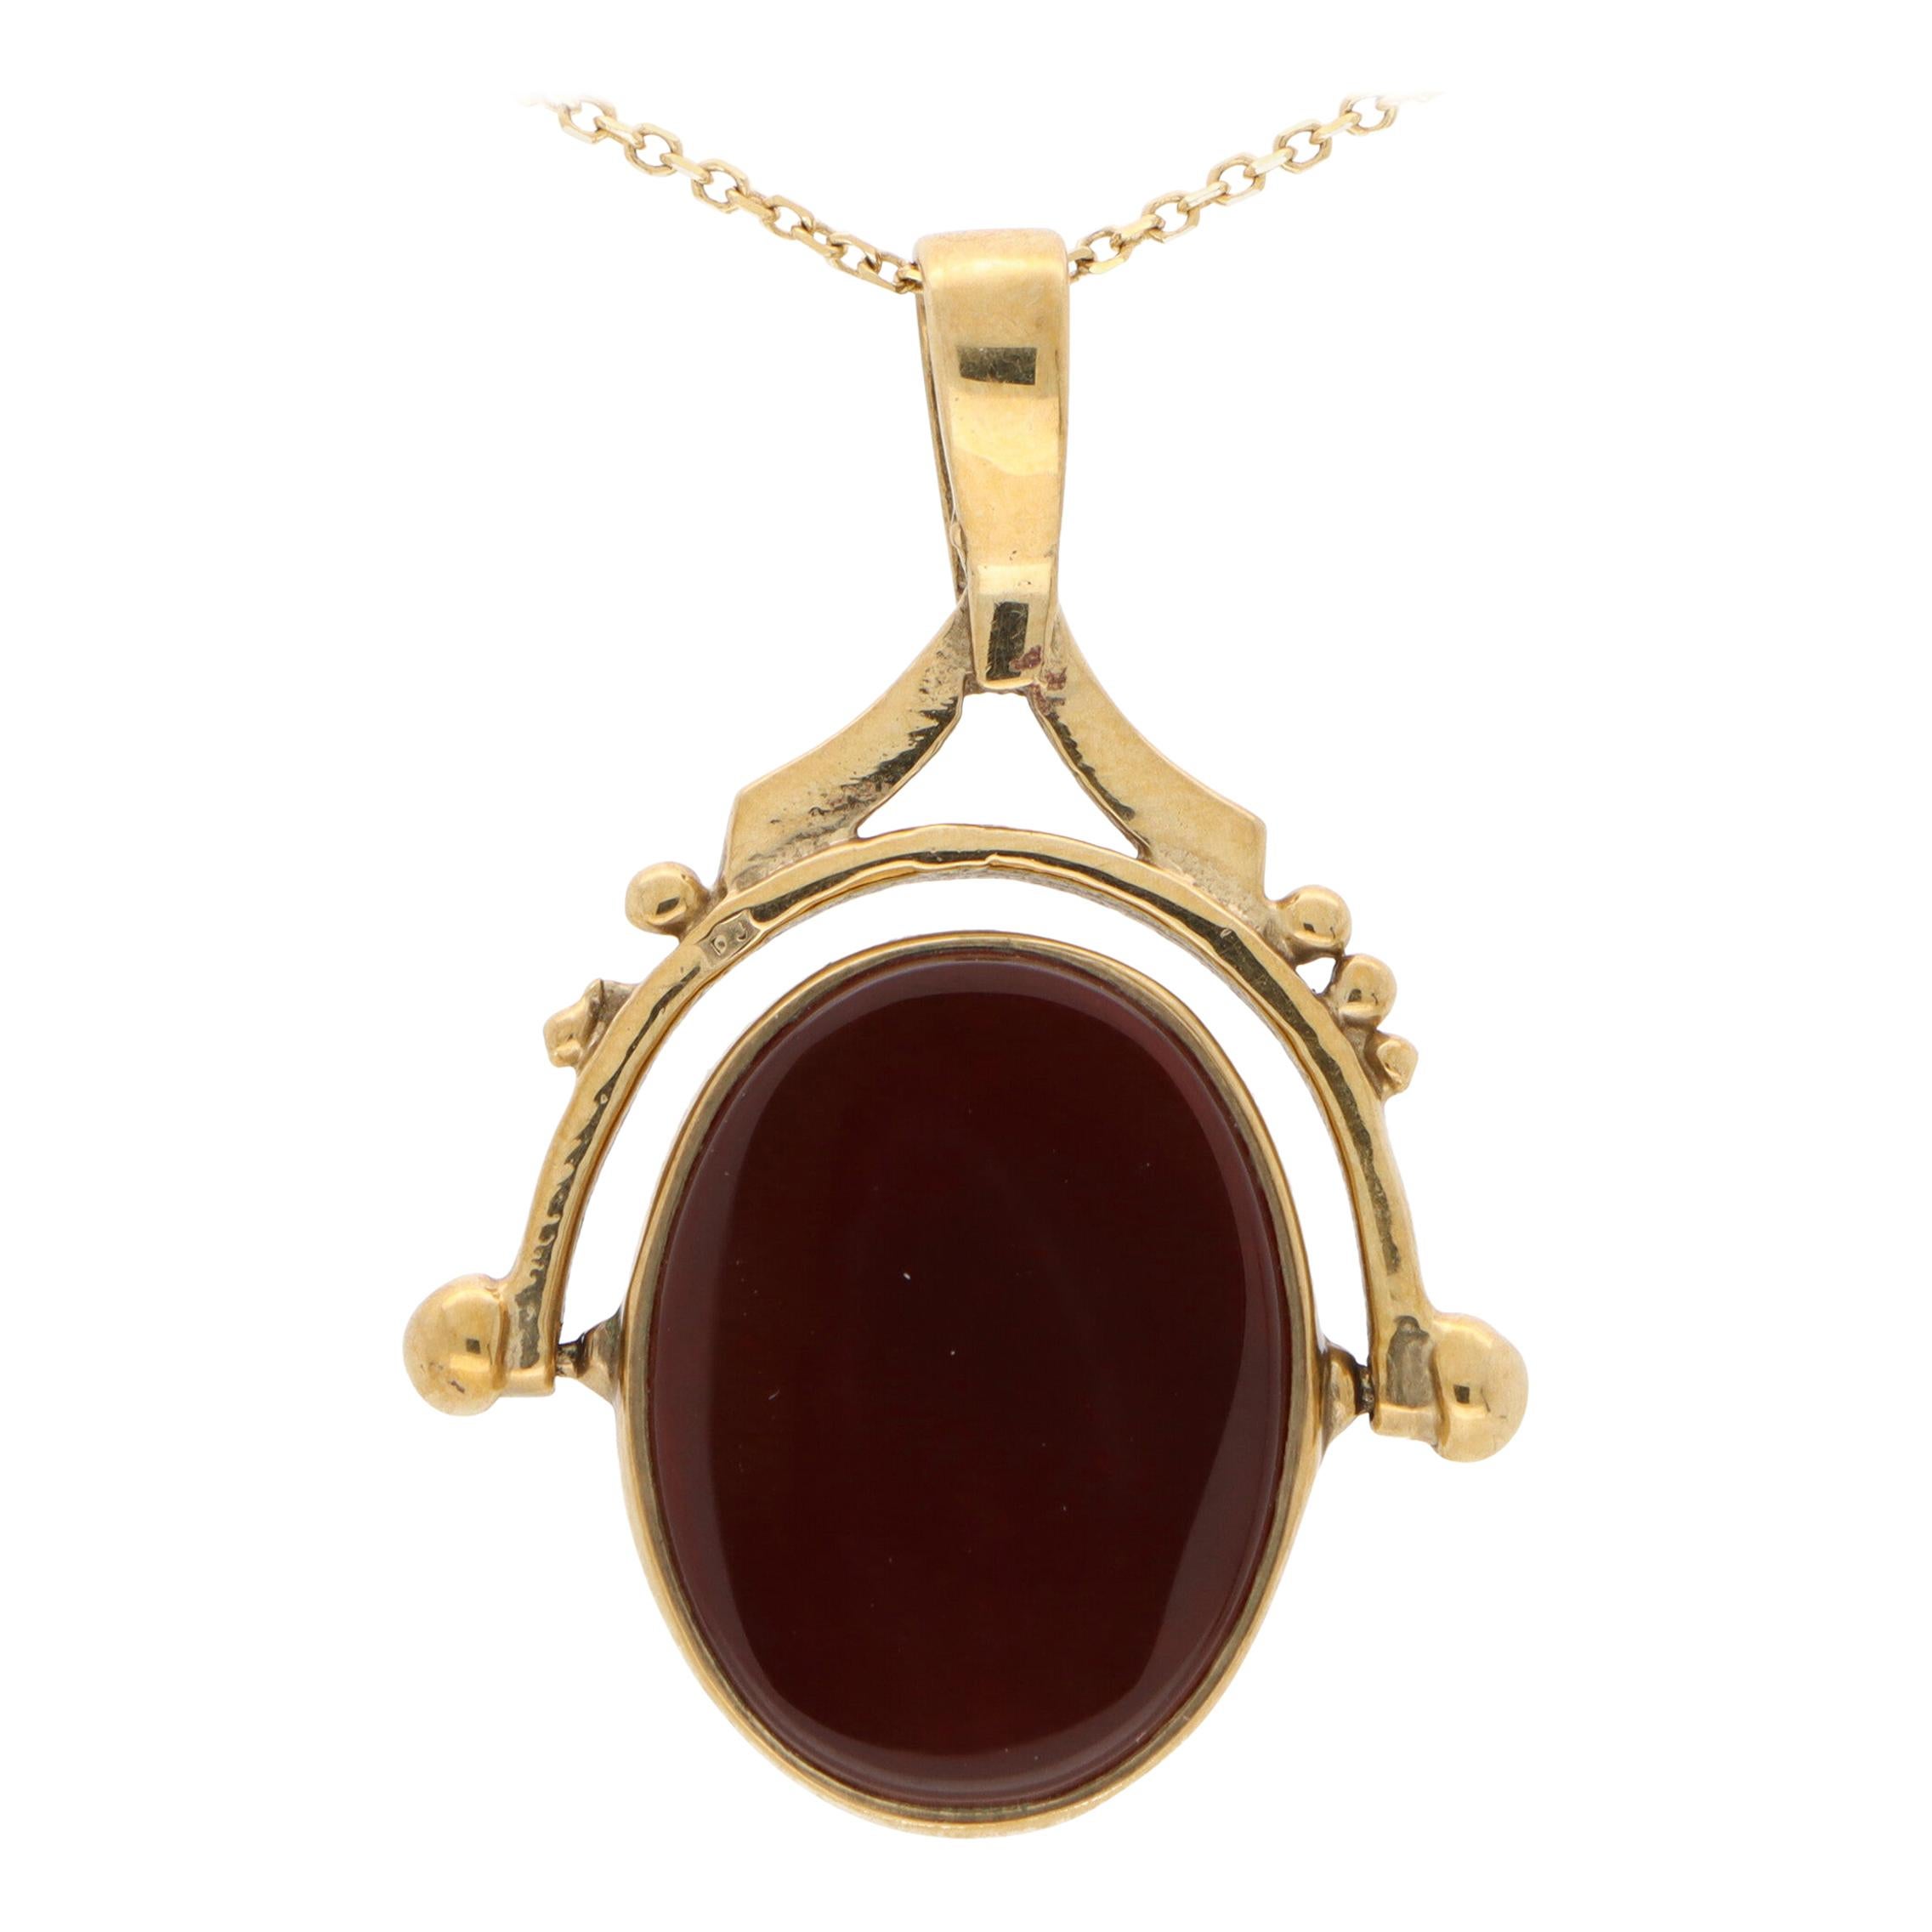 Antique Victorian Onyx and Carnelian Swivel Fob Pendant Set in 9k Yellow Gold